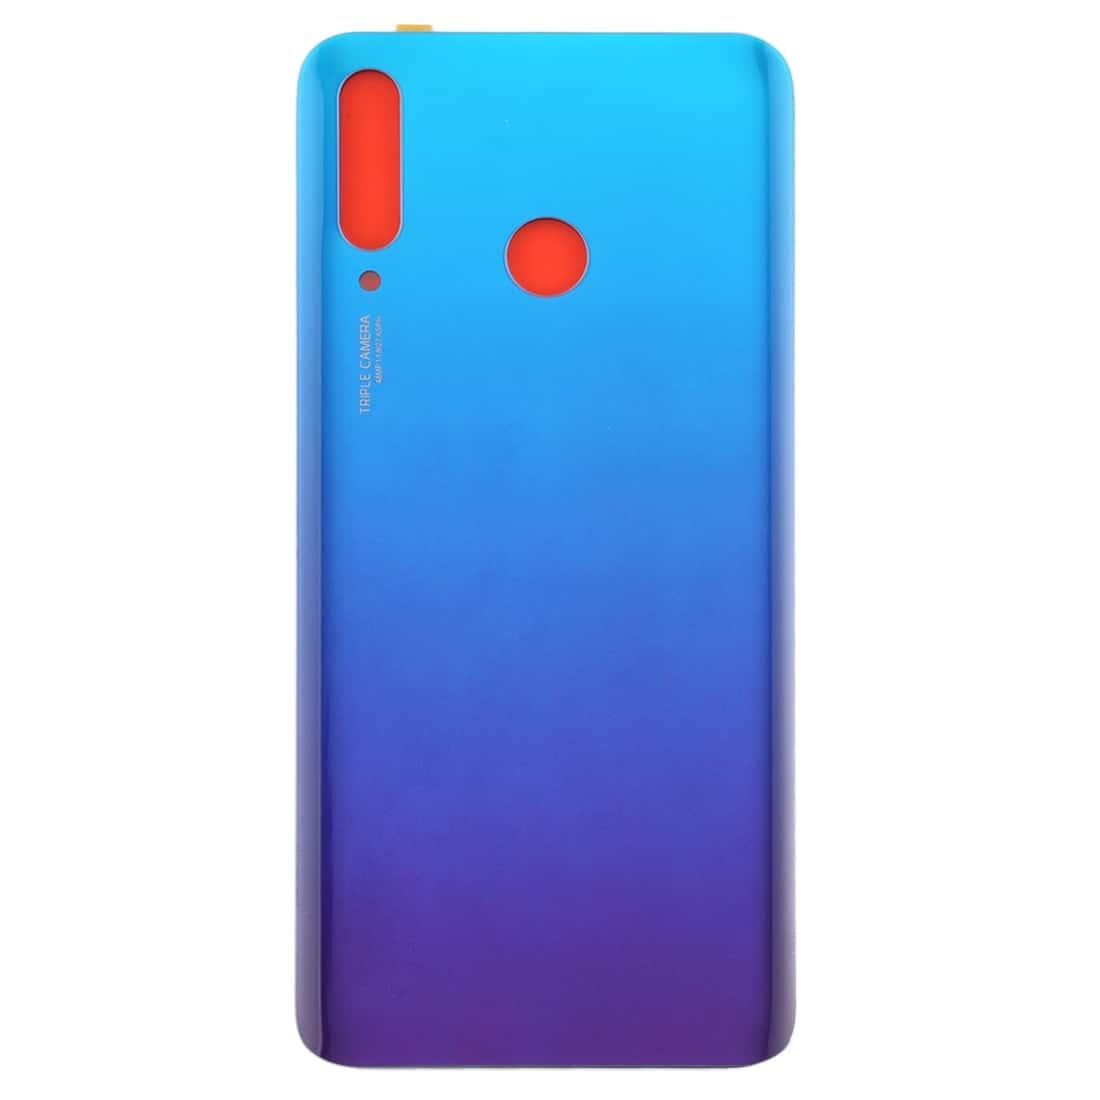 Back Glass Panel for Huawei P30 Lite Blue with Camera Lens